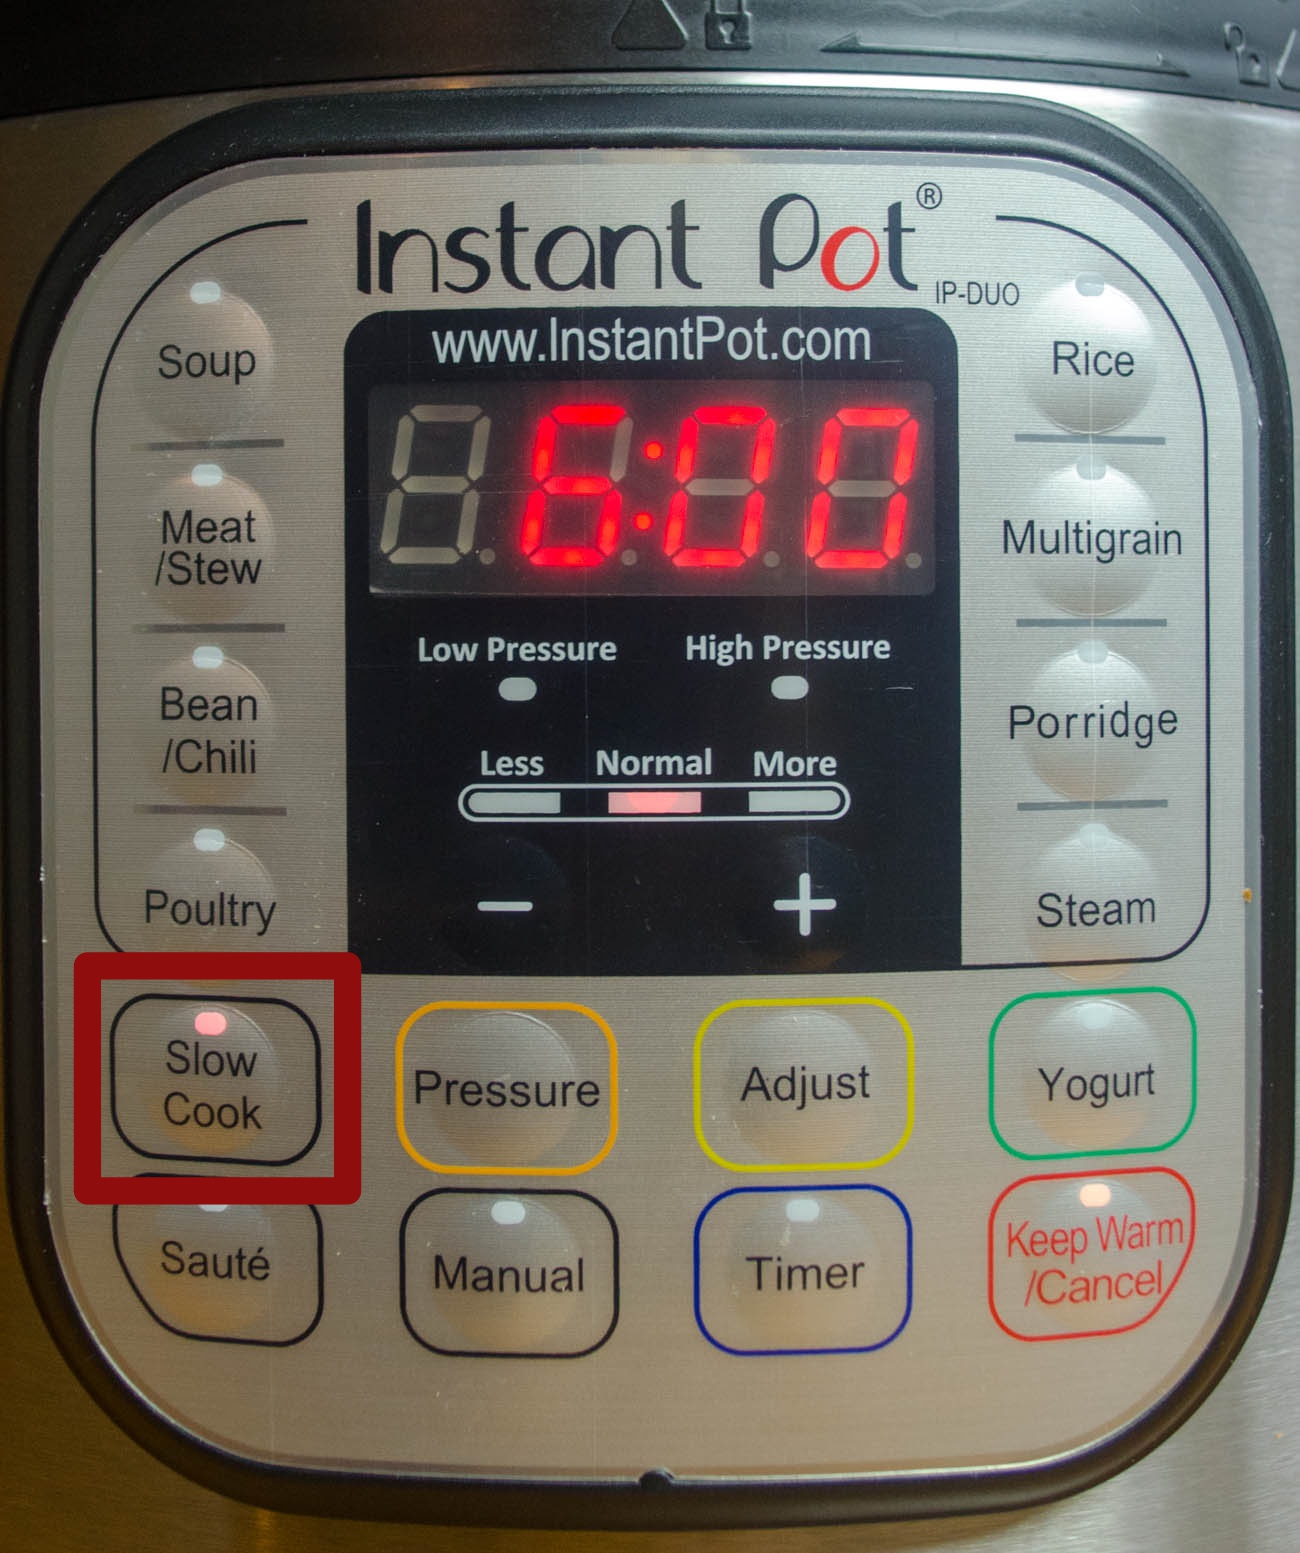 How do I adjust the cooking time and temperature on Instant Pot